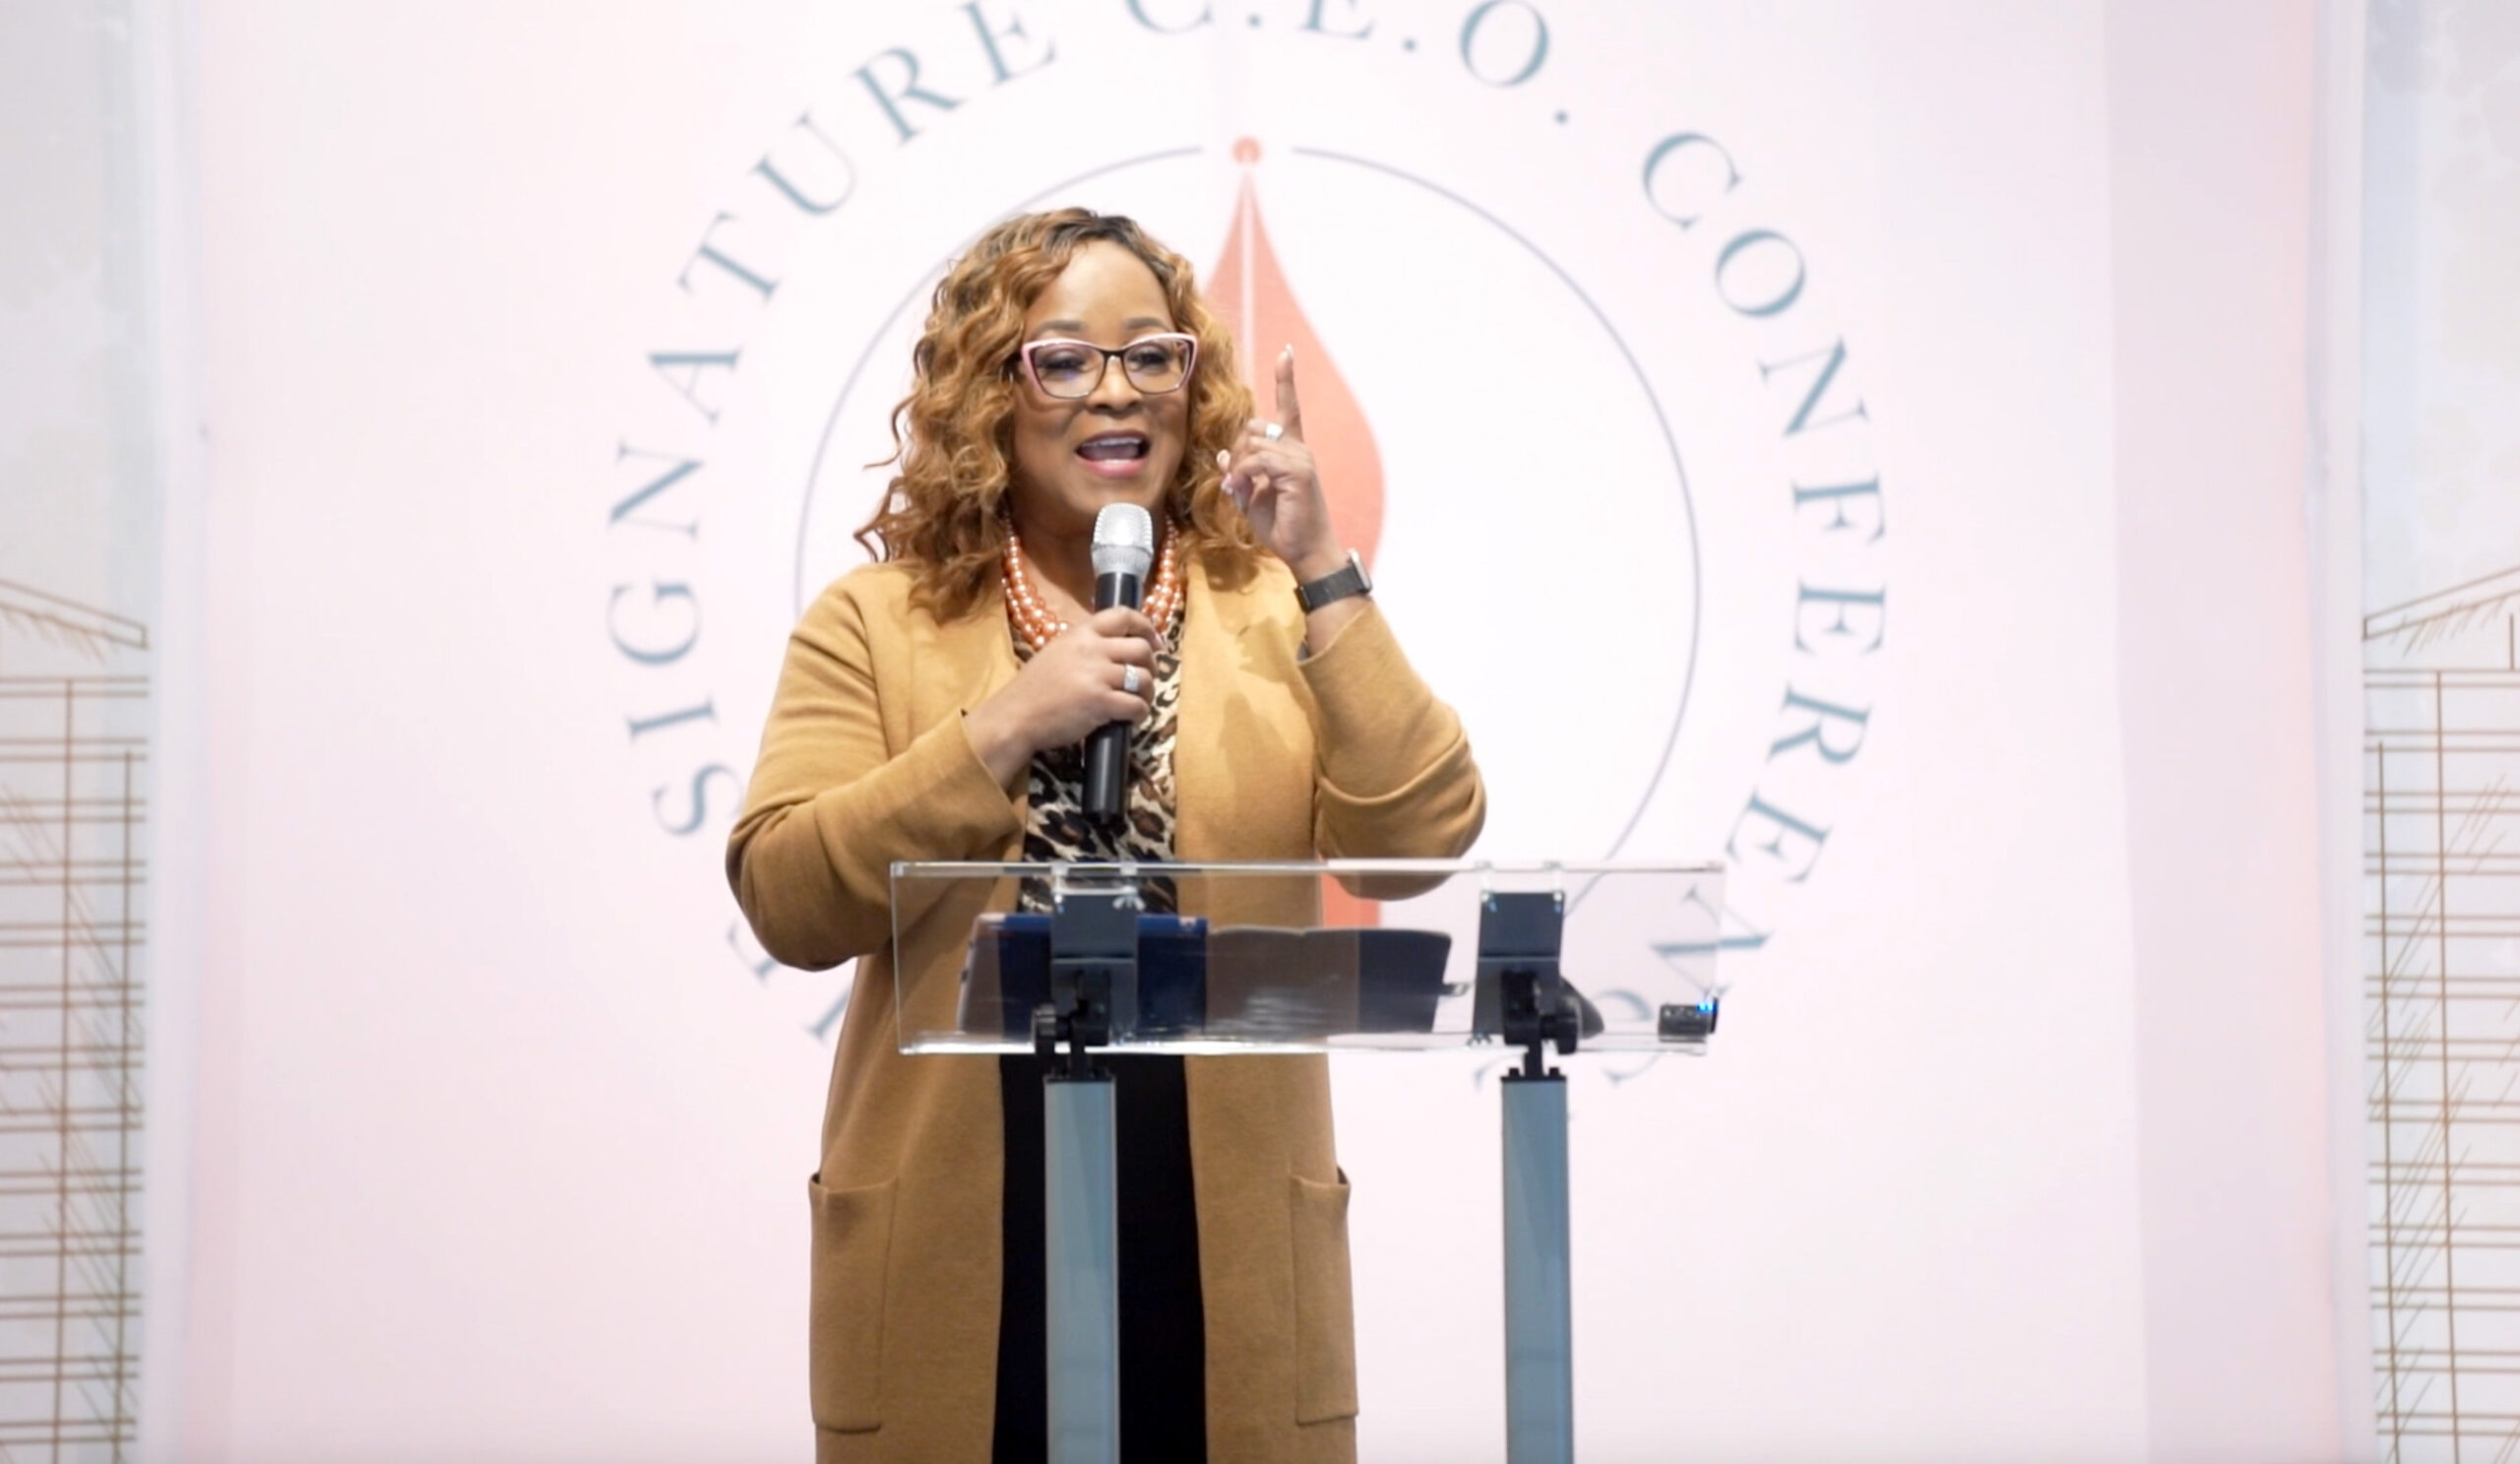 screenshot from video of a speaker in front of a backdrop that says Signature C.E.O. Conference.